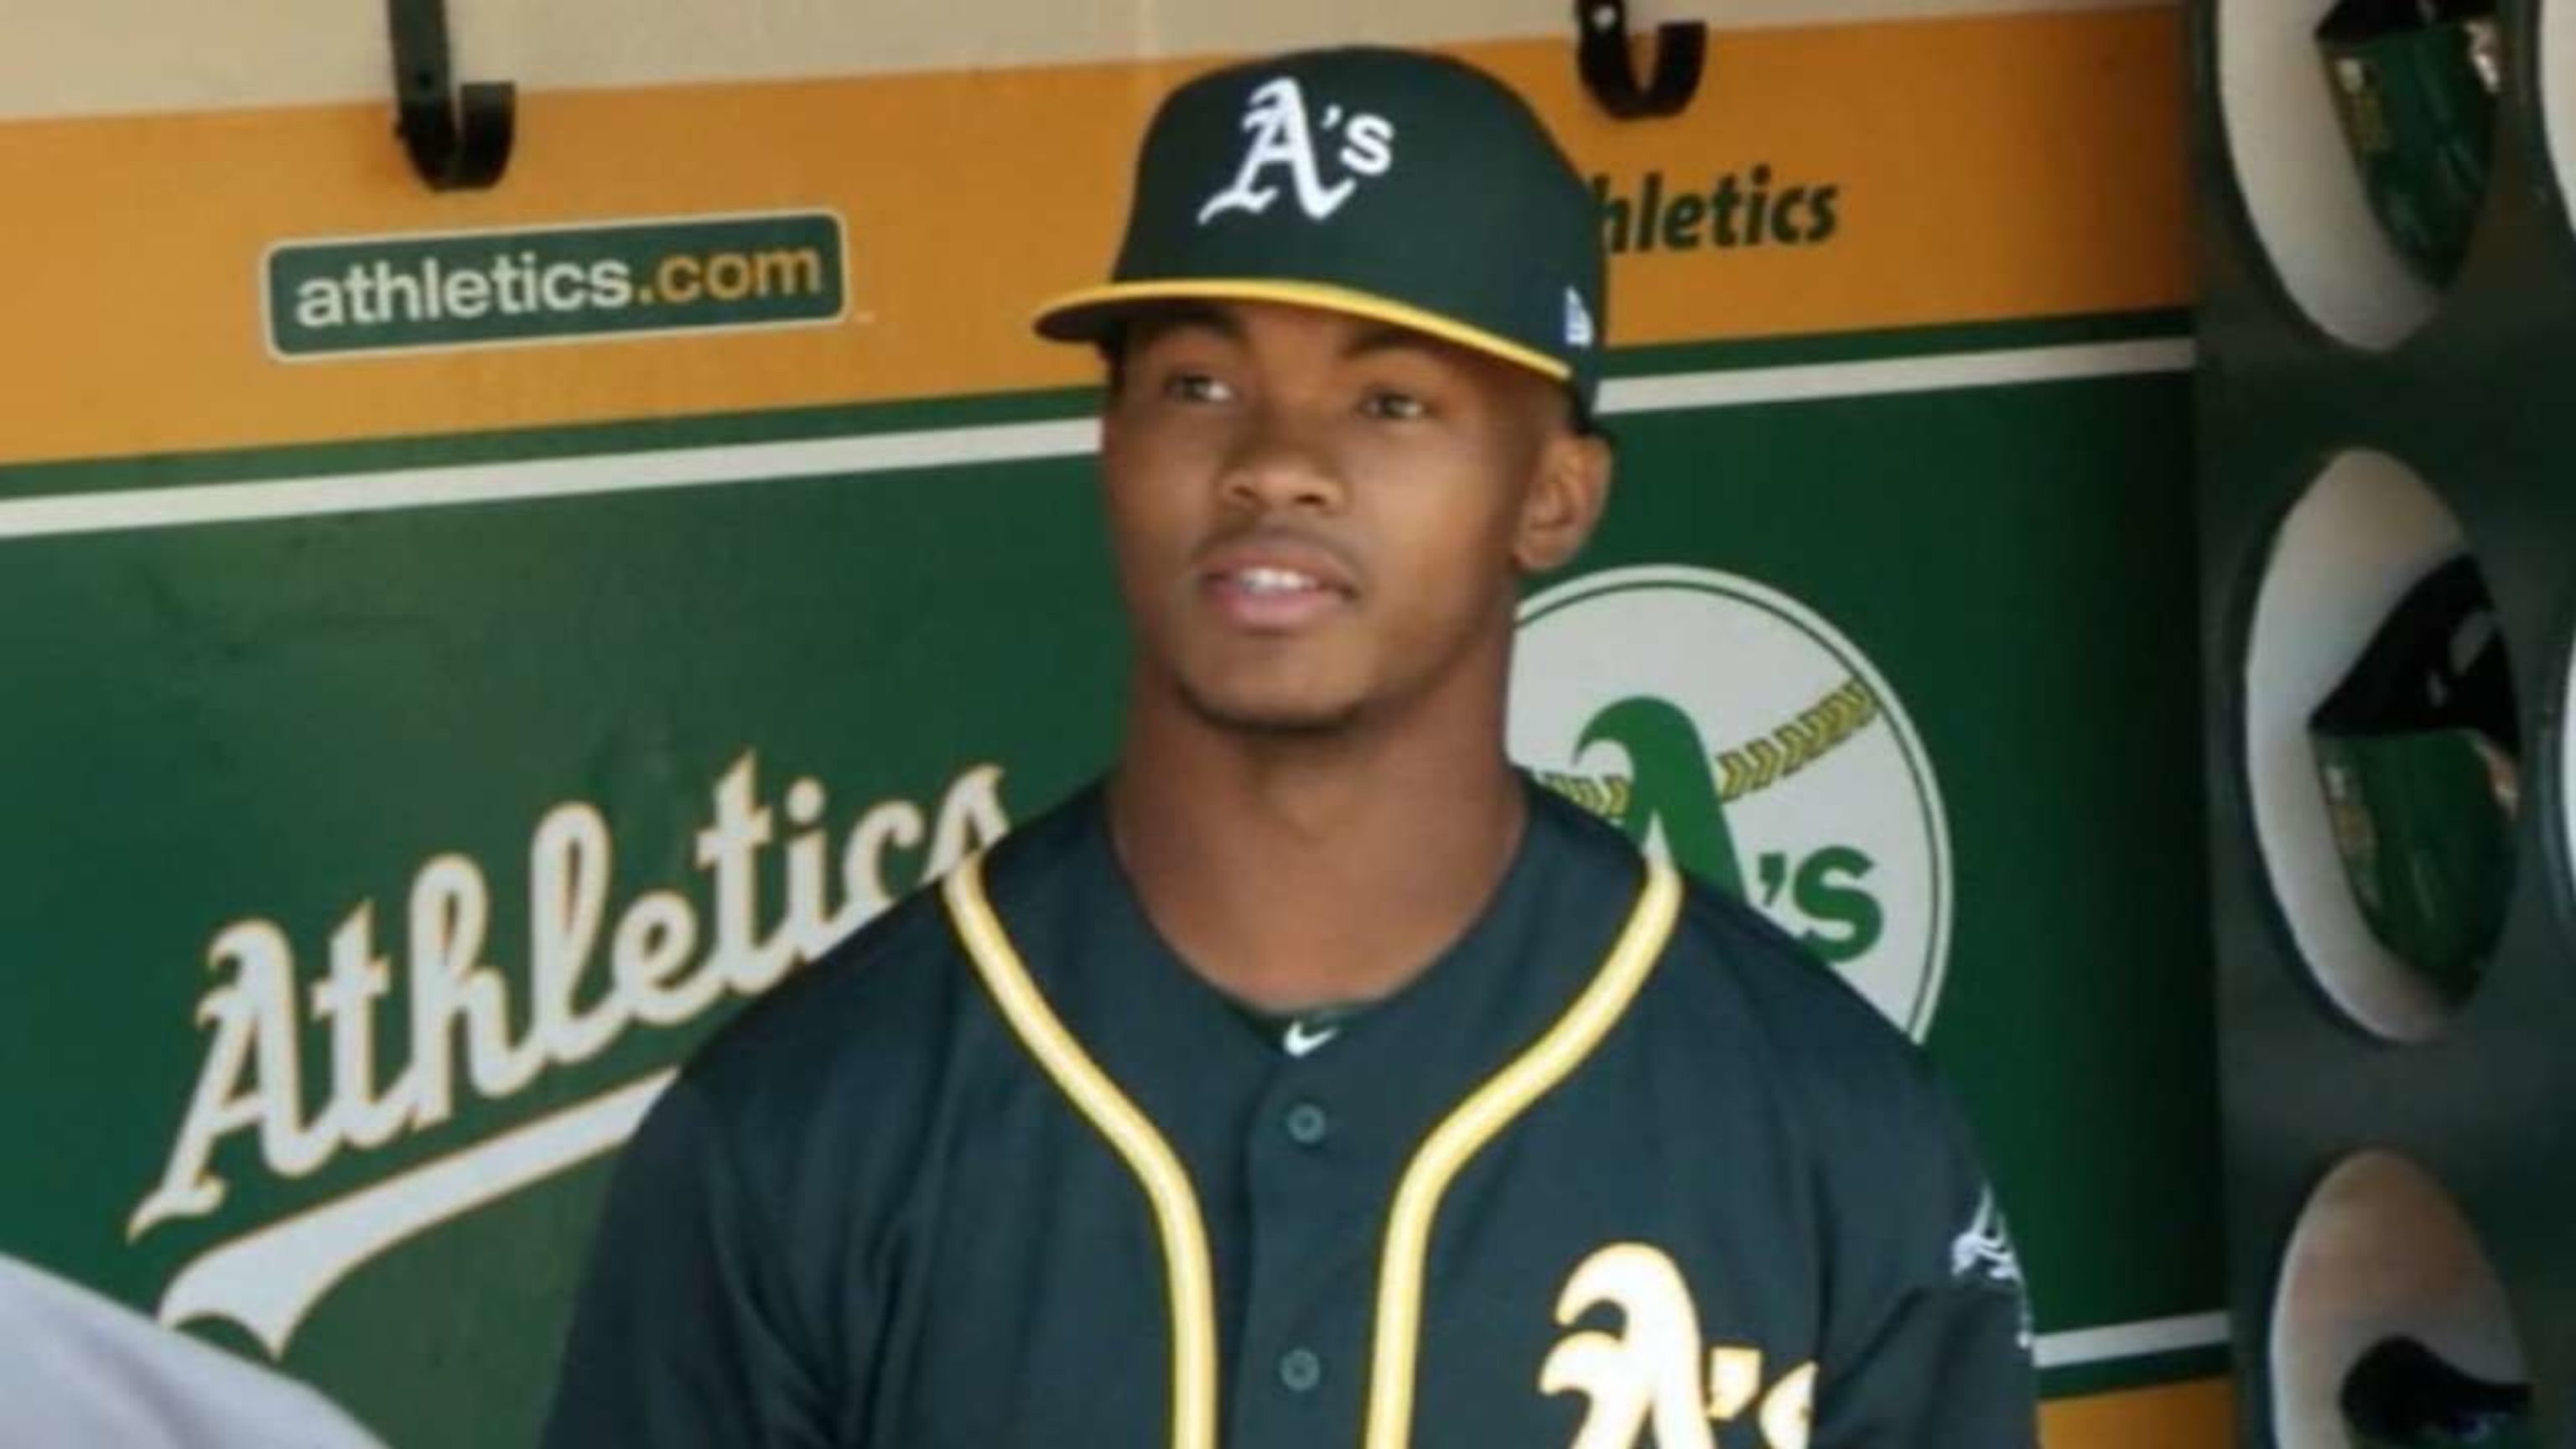 Athletes from other sports drafted by MLB teams